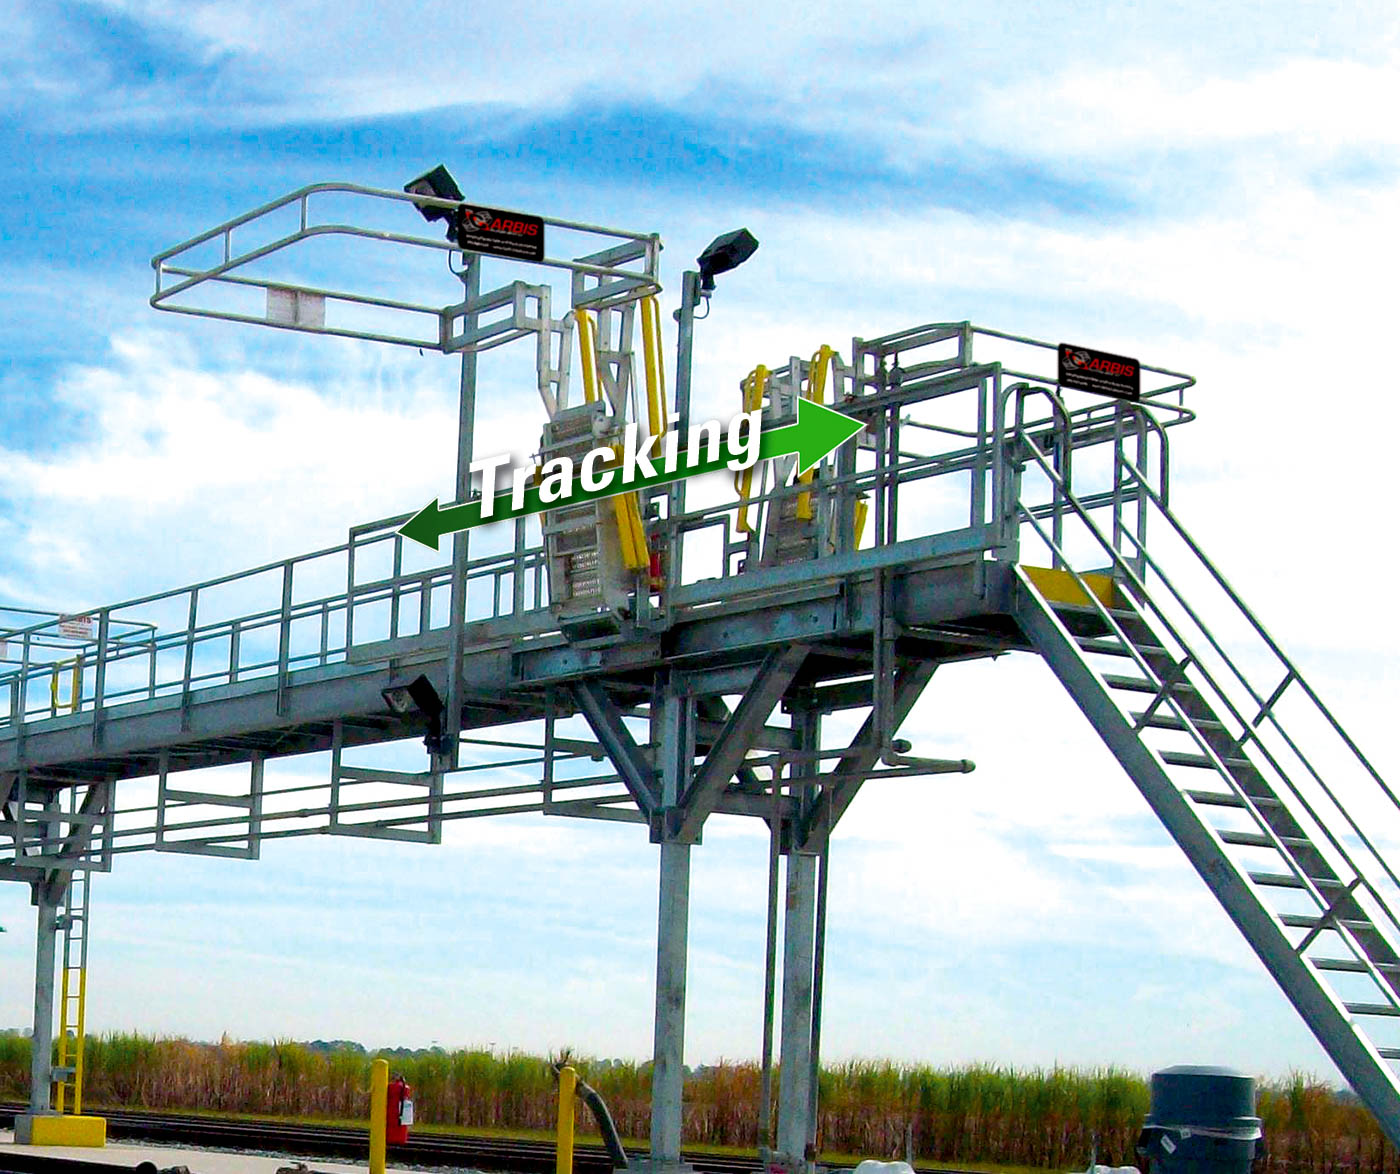 A track mounted gangway is shown on a loading platform.